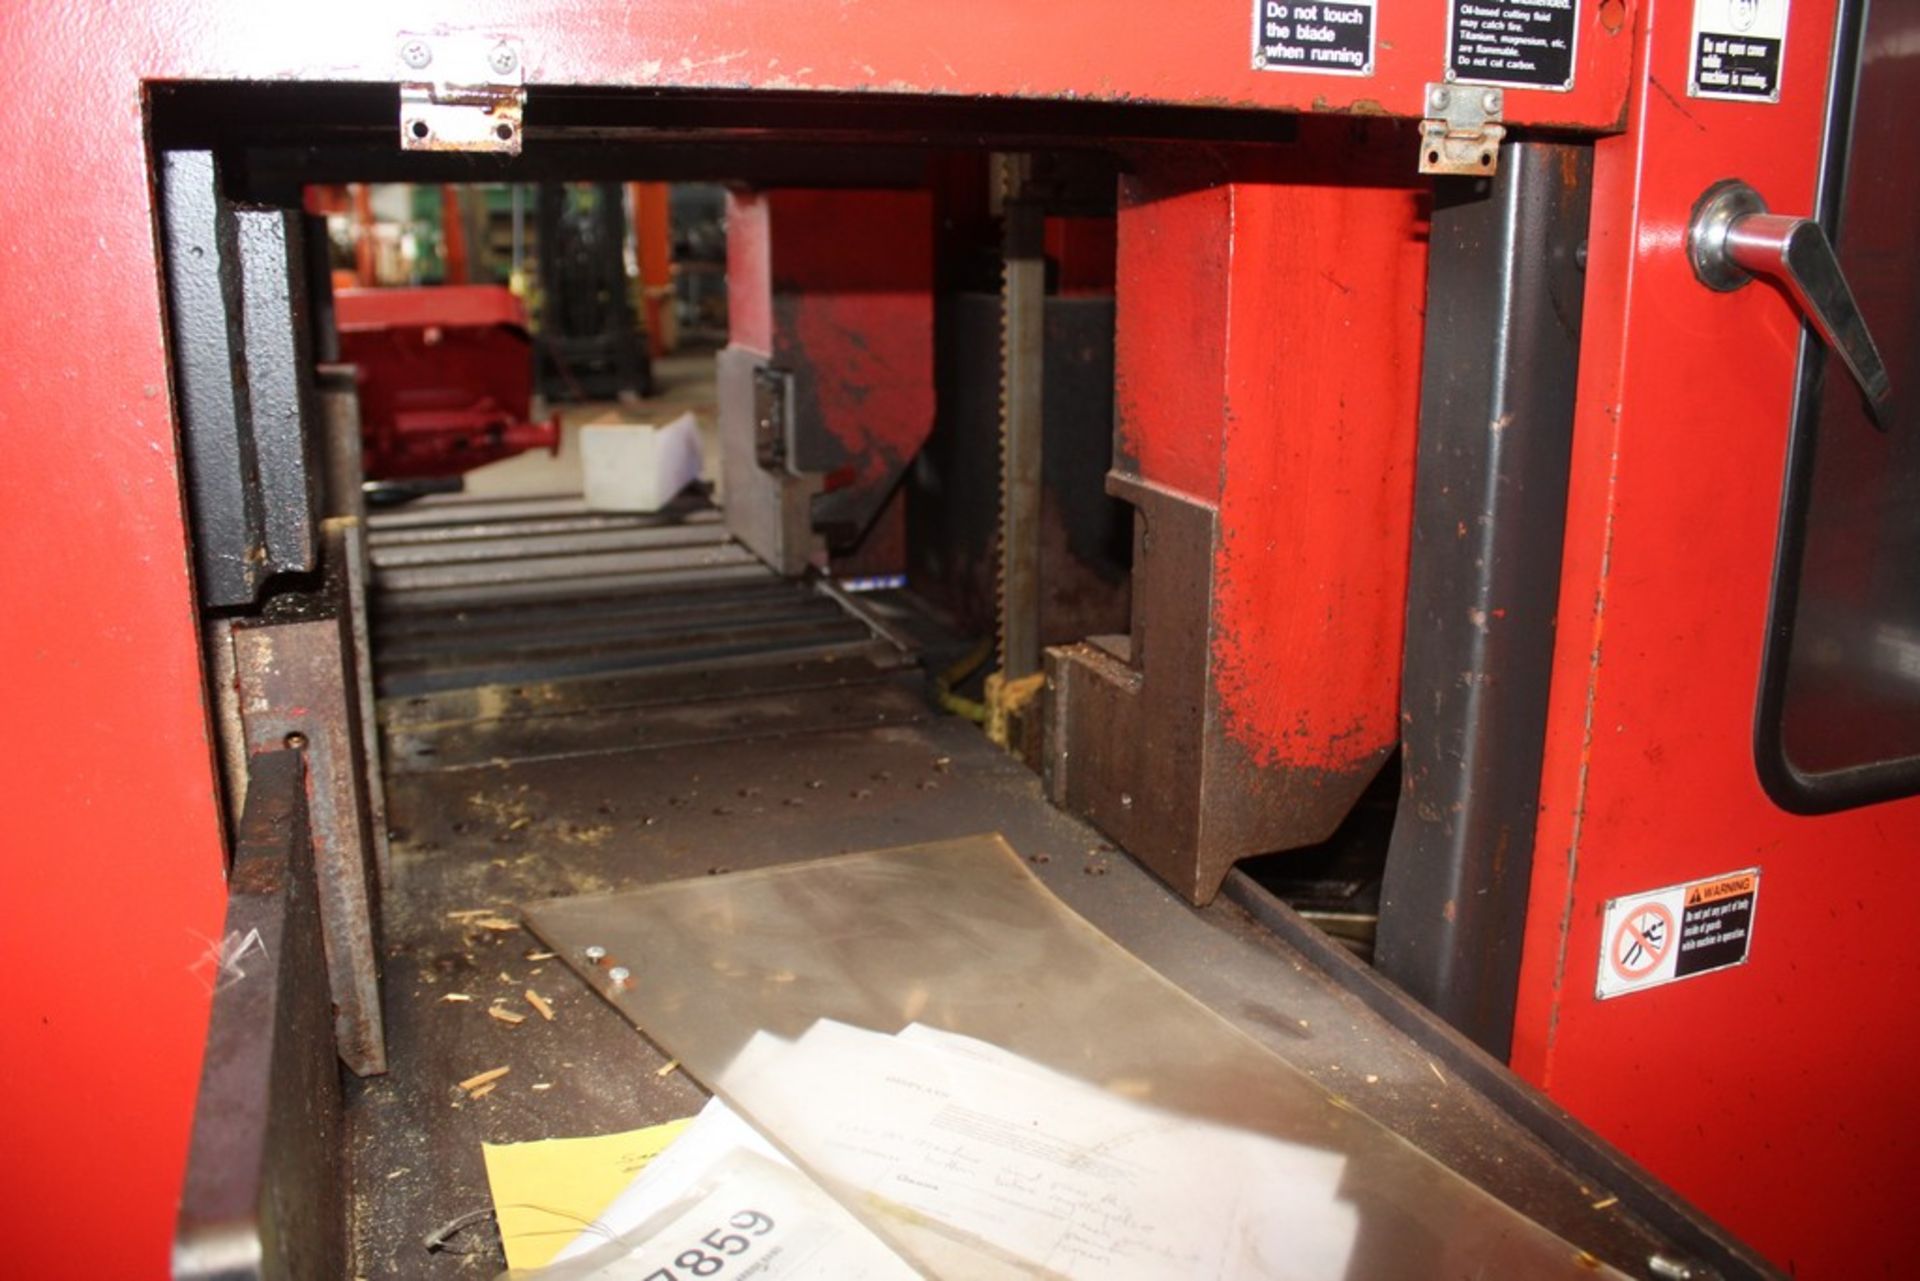 16.9" AMADA CTB400 CNC VERTICAL CARBIDE BAND SAW, S/N 40850029 (1998), 1.18" TO 16.9", CUTTING - Image 3 of 5